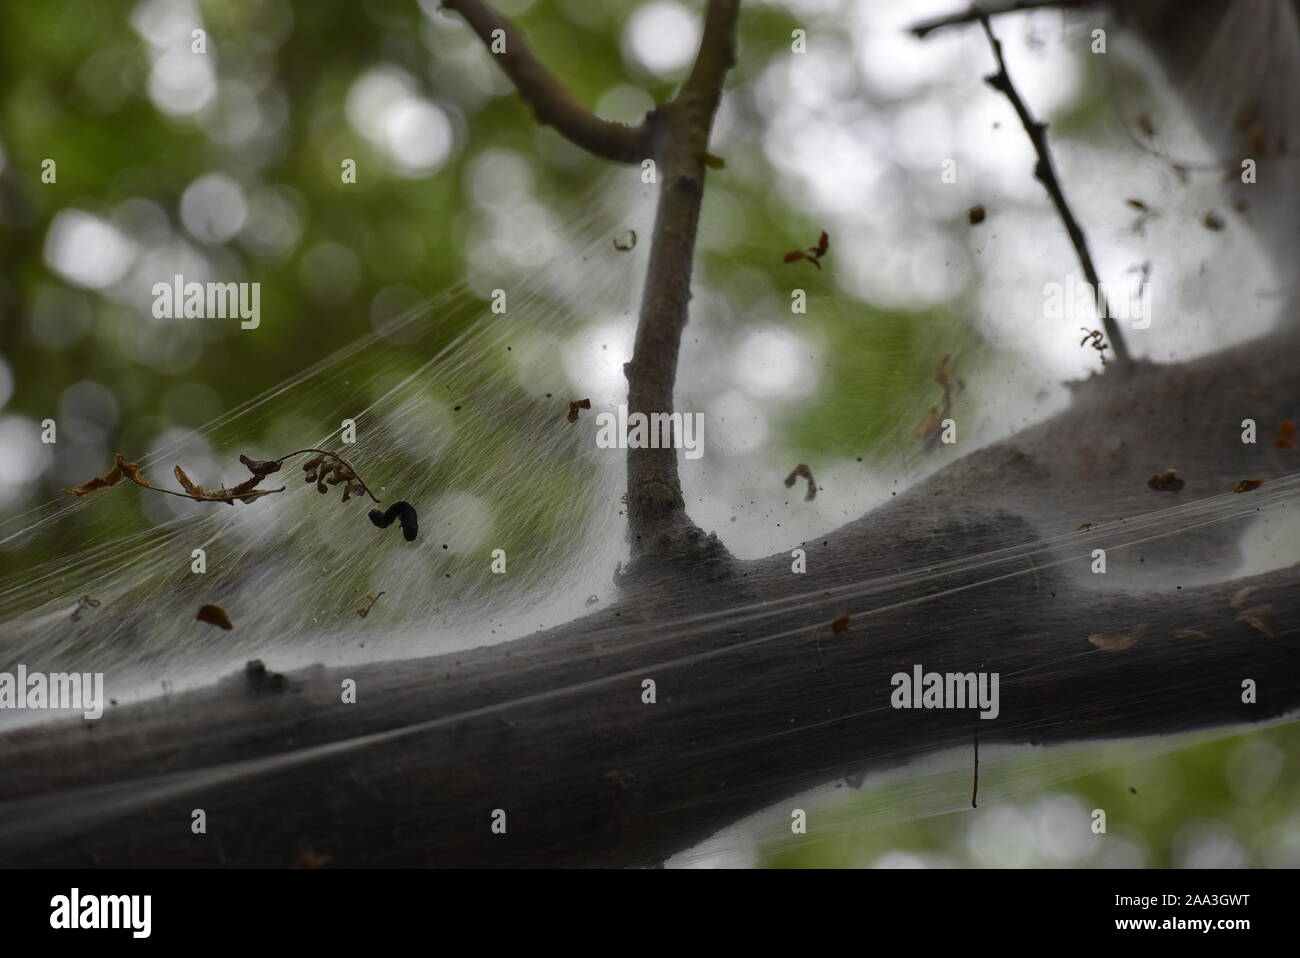 spider web on a branch Stock Photo